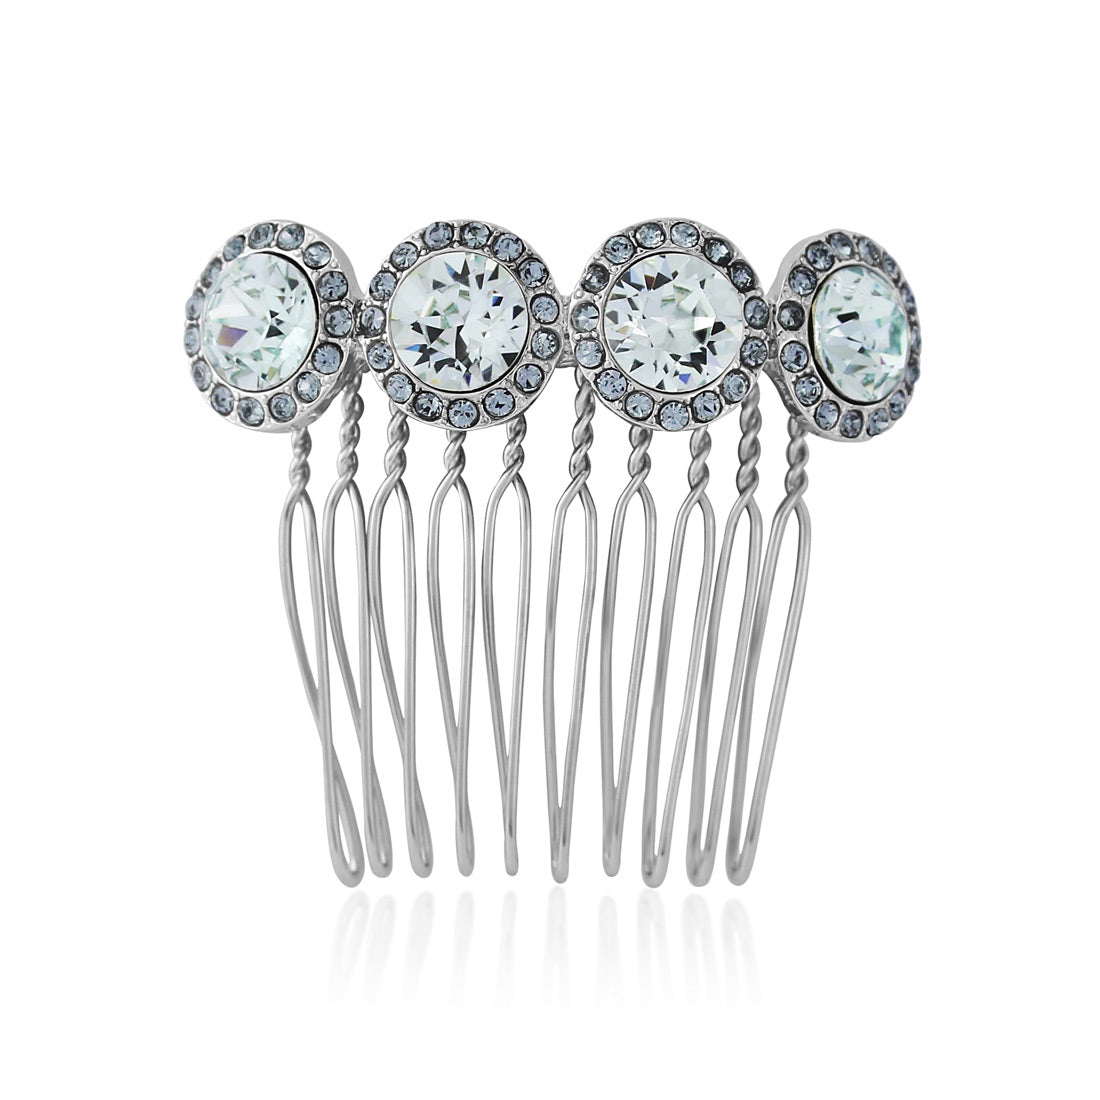 Waterfall of Love Pale Blue Crystal Bridal Hair Comb